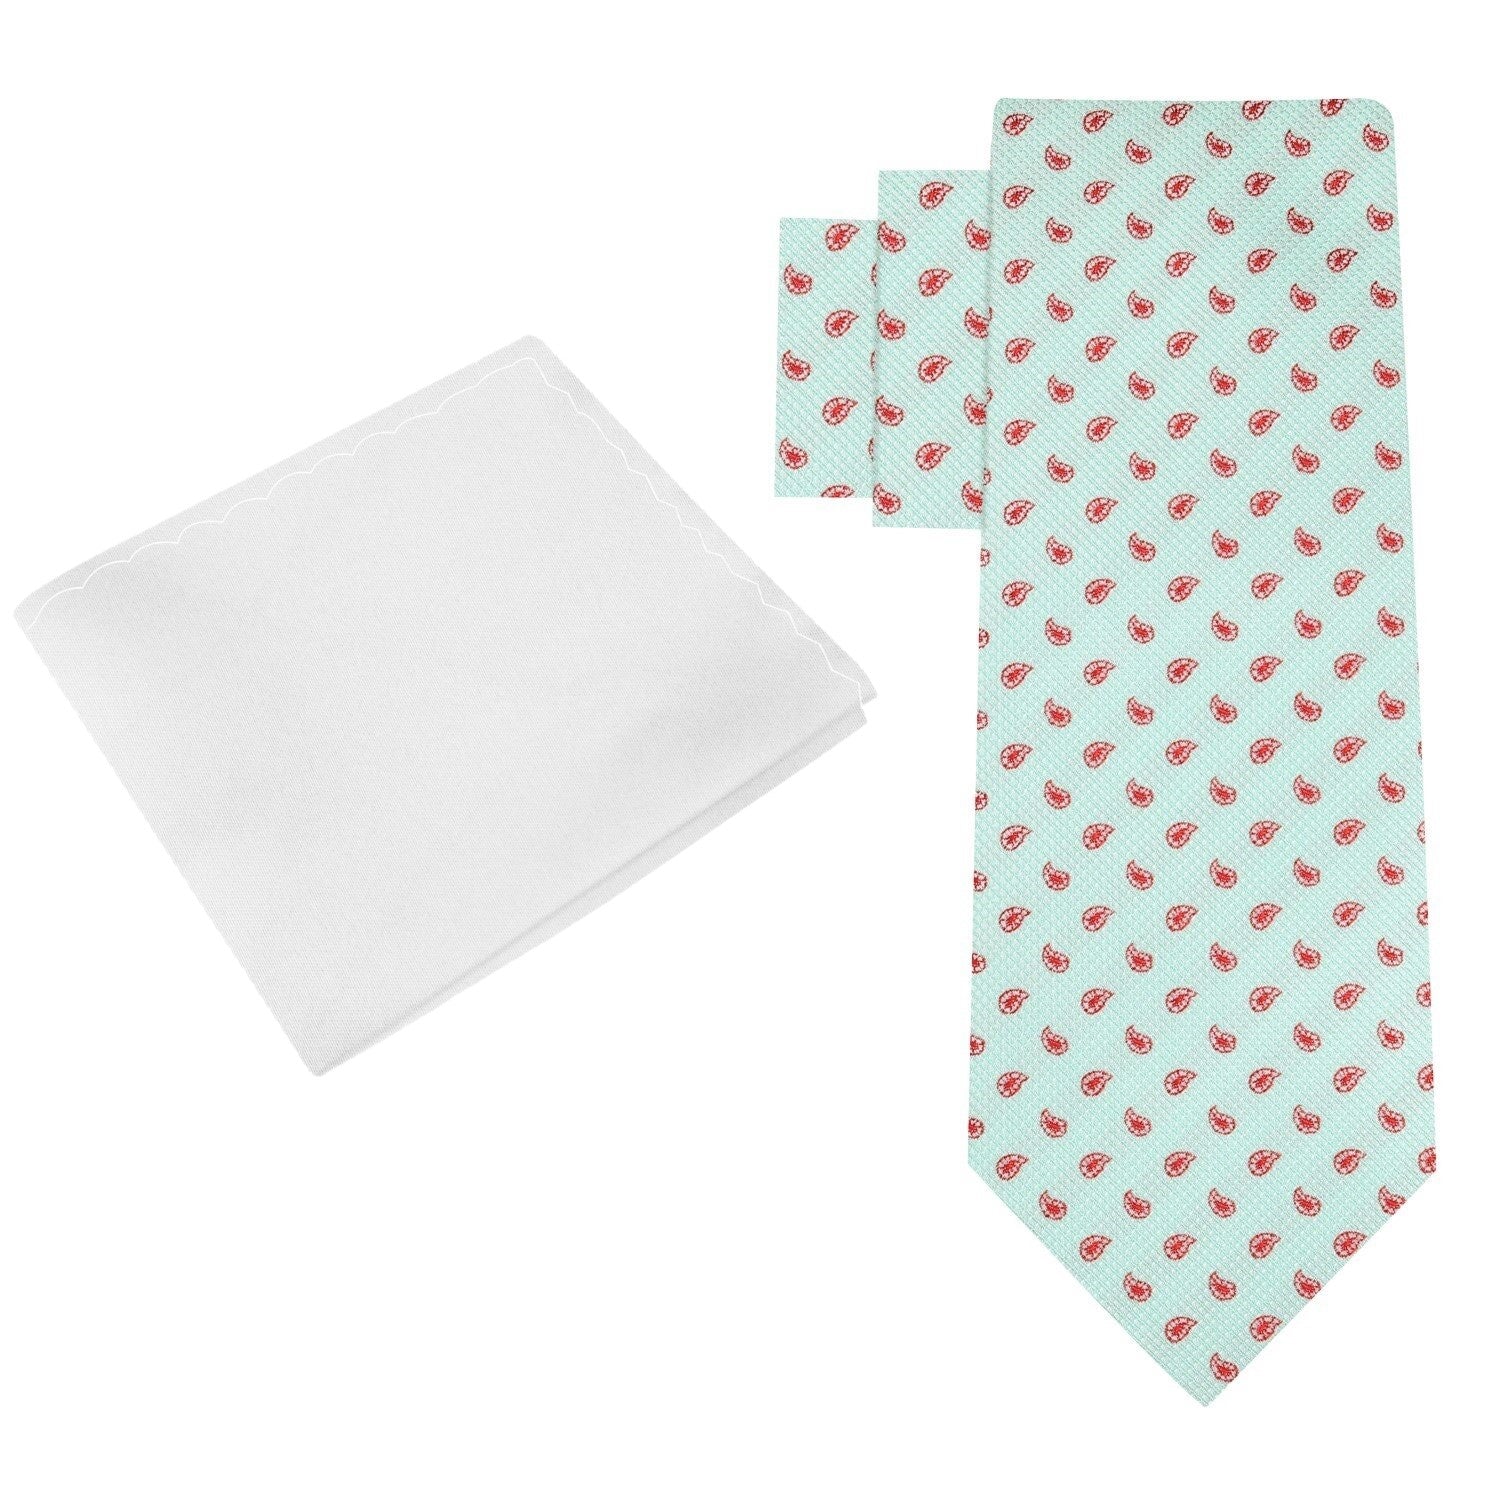 Alt View: Light Green, Red Paisley Tie and White Square